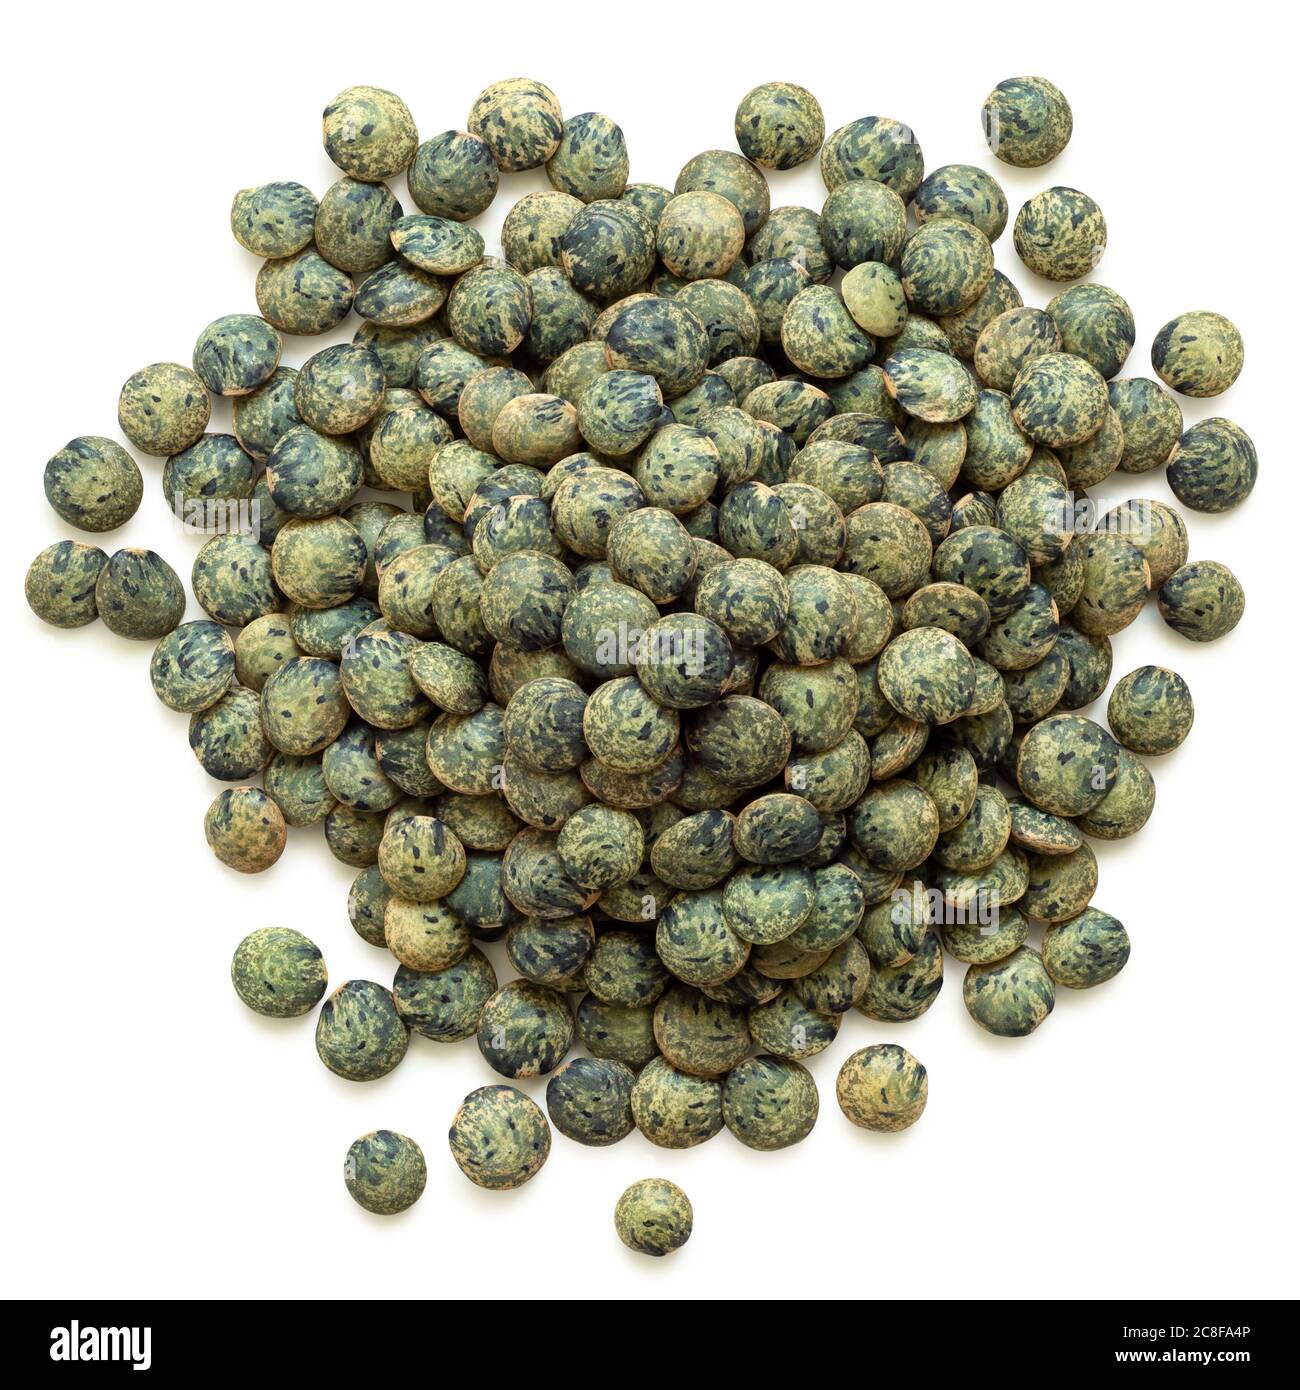 Heap of dry french green puy lentils isolated on white. Top view. Stock Photo